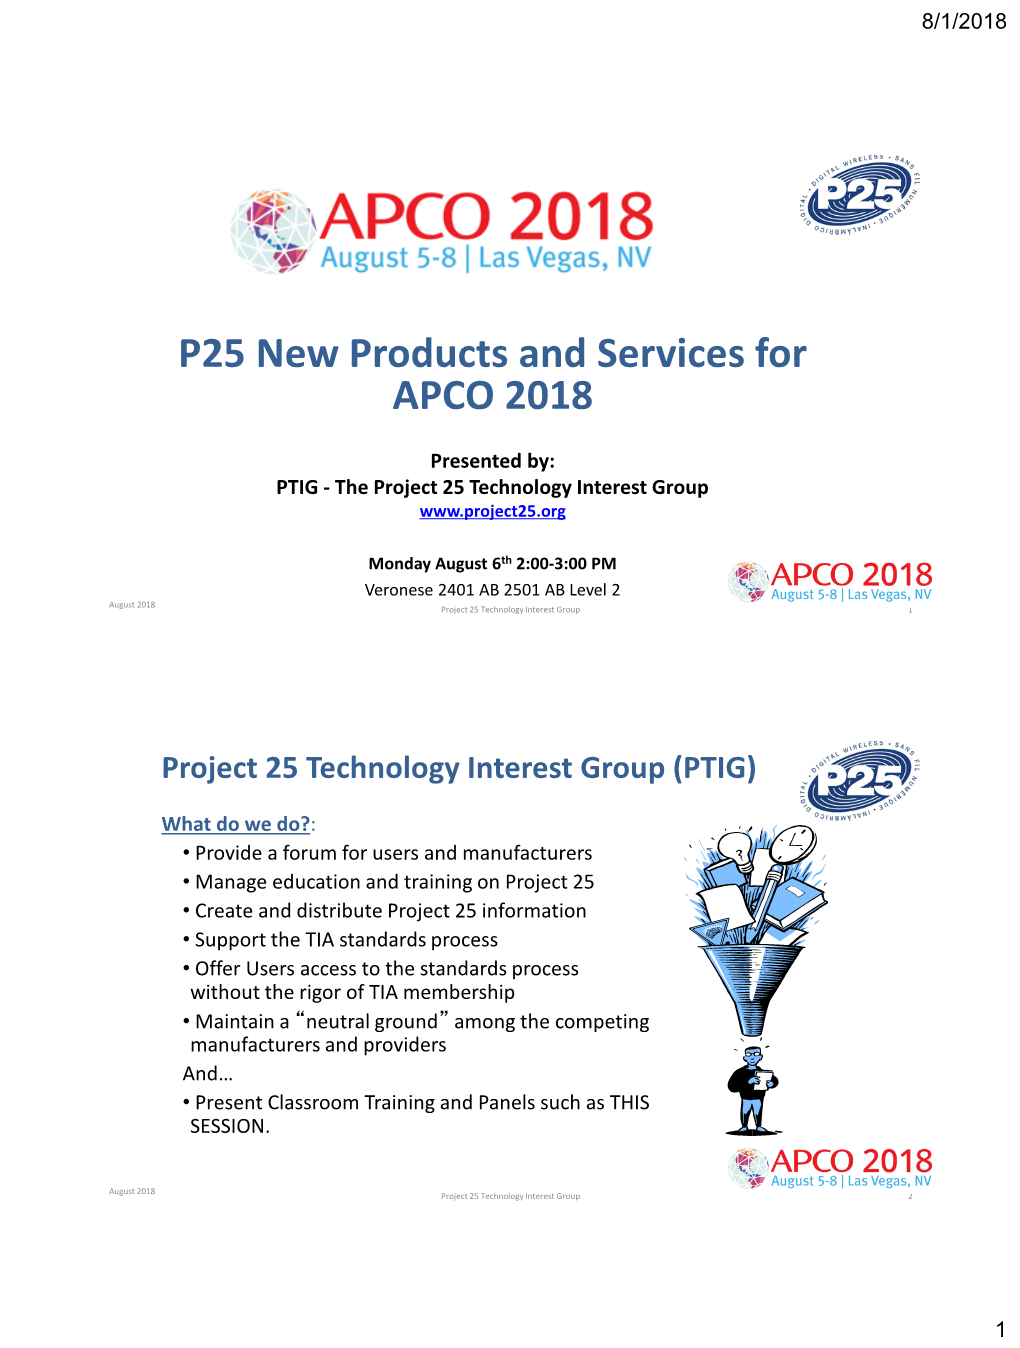 P25 Latest Products and Services PPT APCO 2018 REV 06 Final 180801 .Pdf